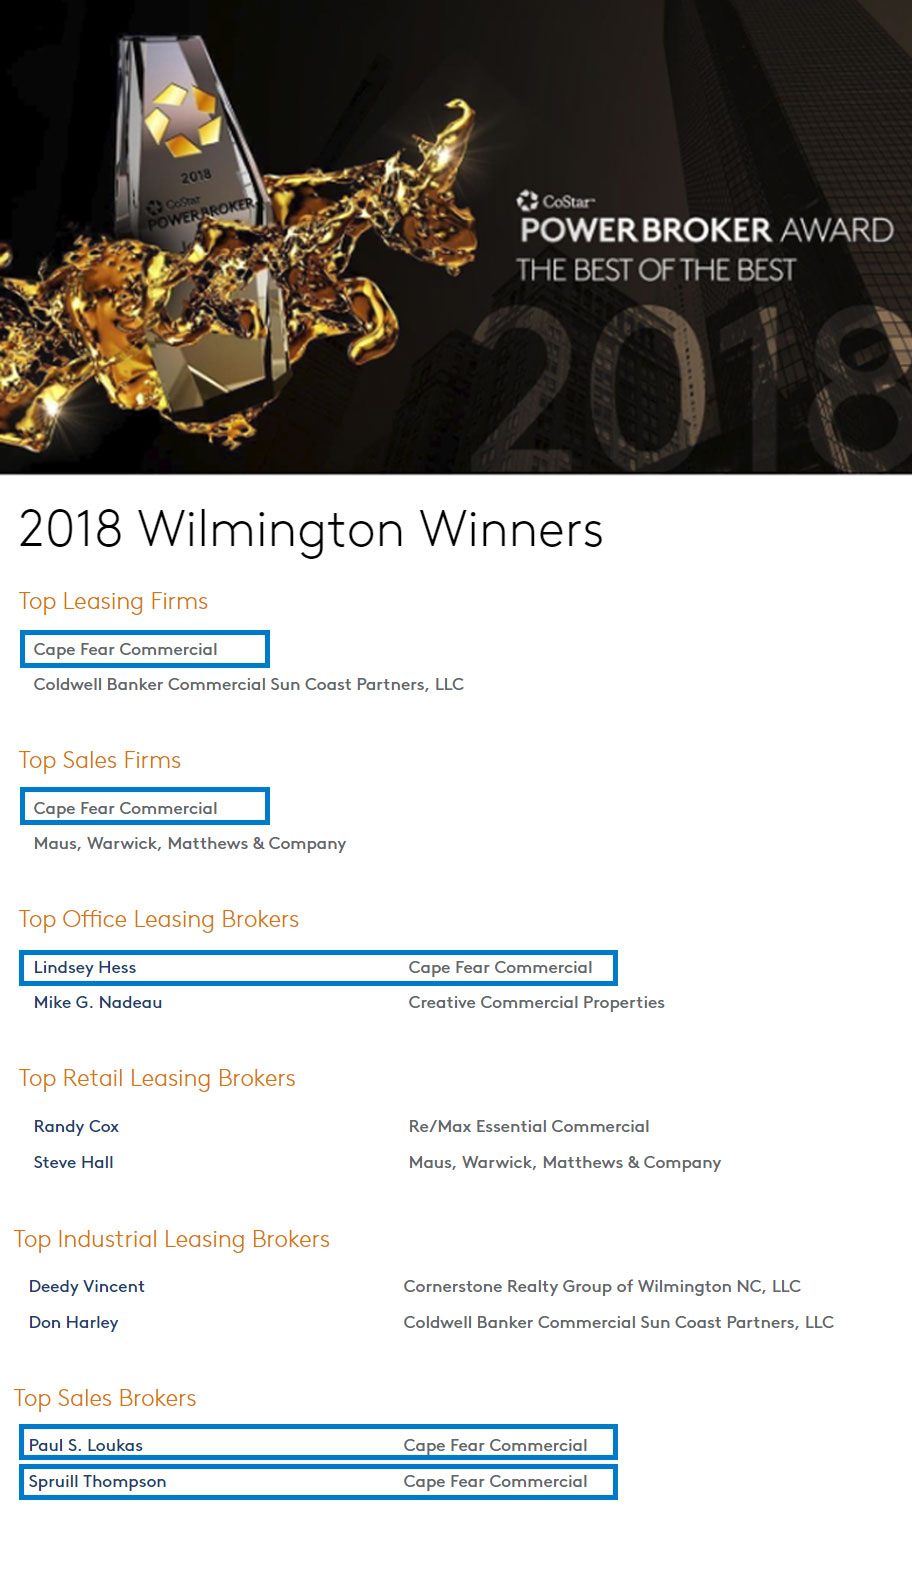 Listing of all of CoStar's Power Broker Award recipients for 2018 in the Wilmington, NC market